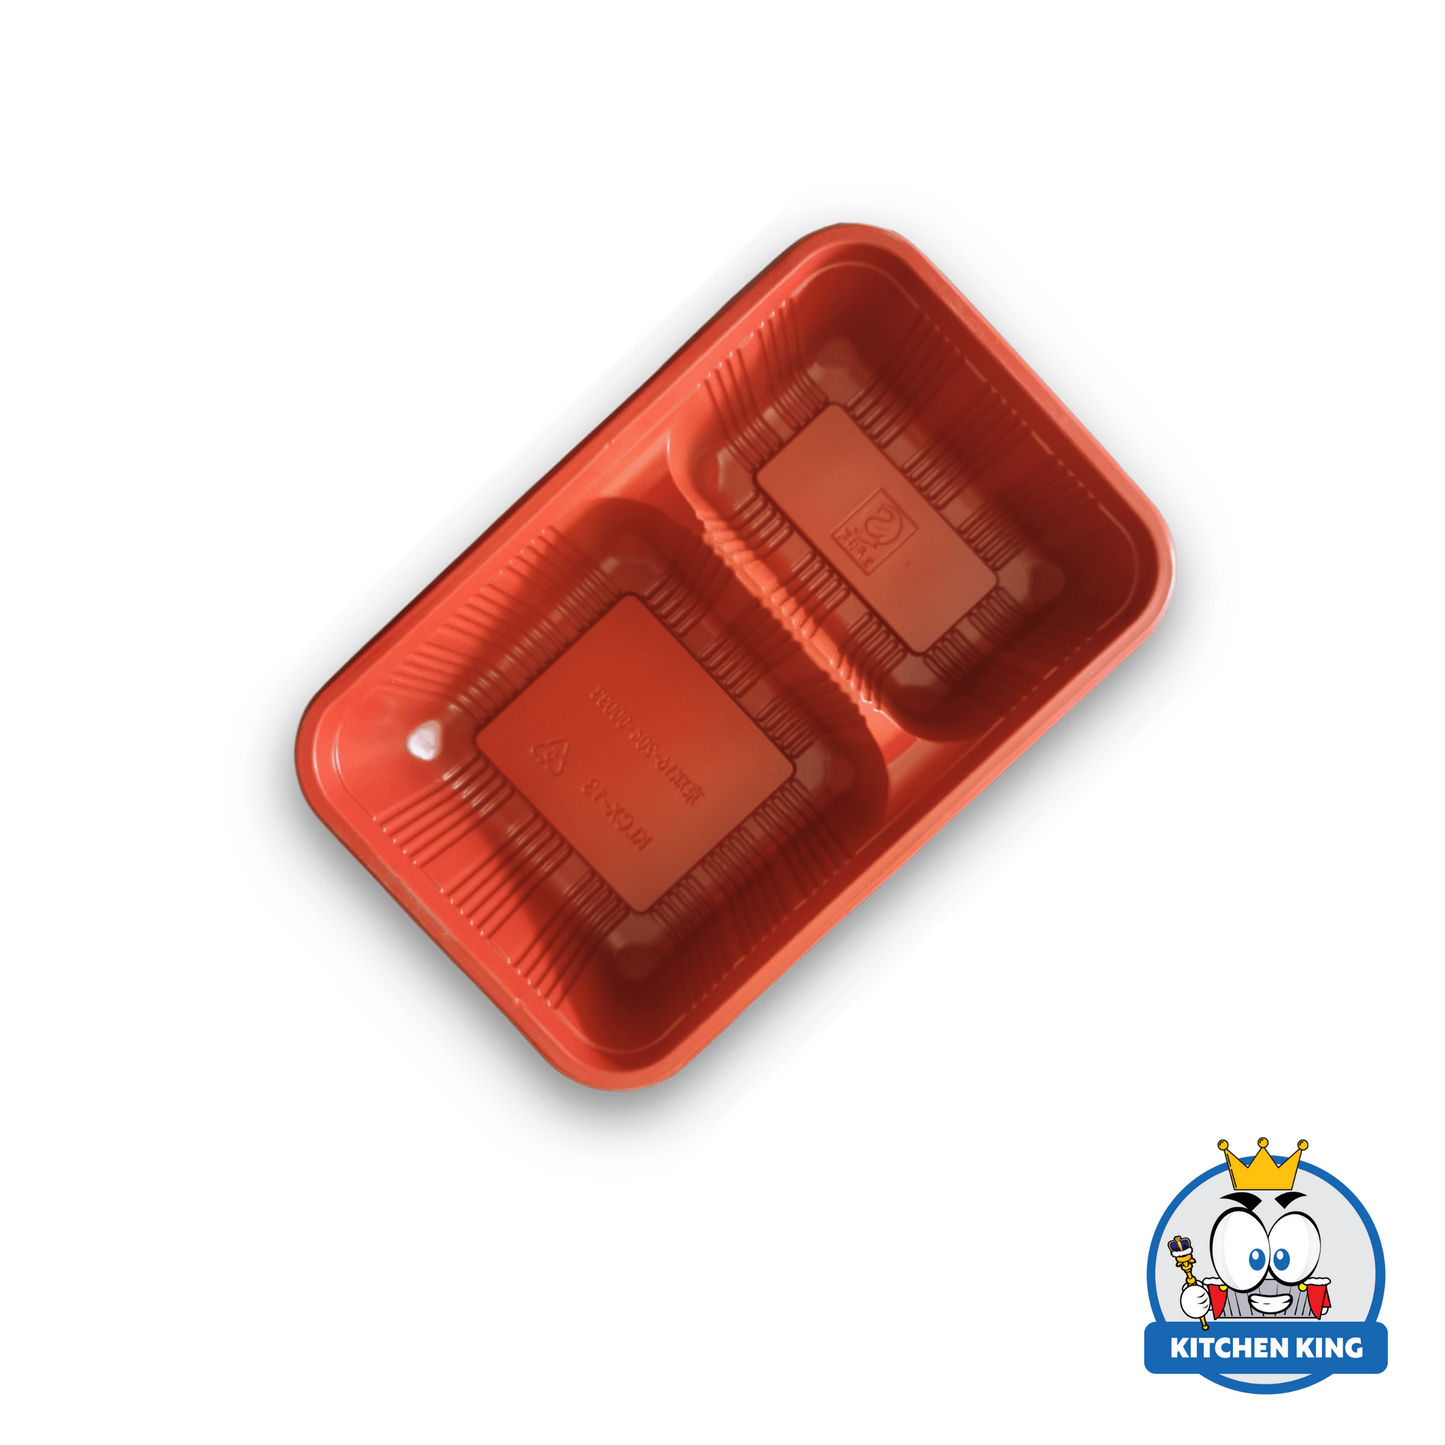 Bento Box Tray 2 Division with Plastic Lid